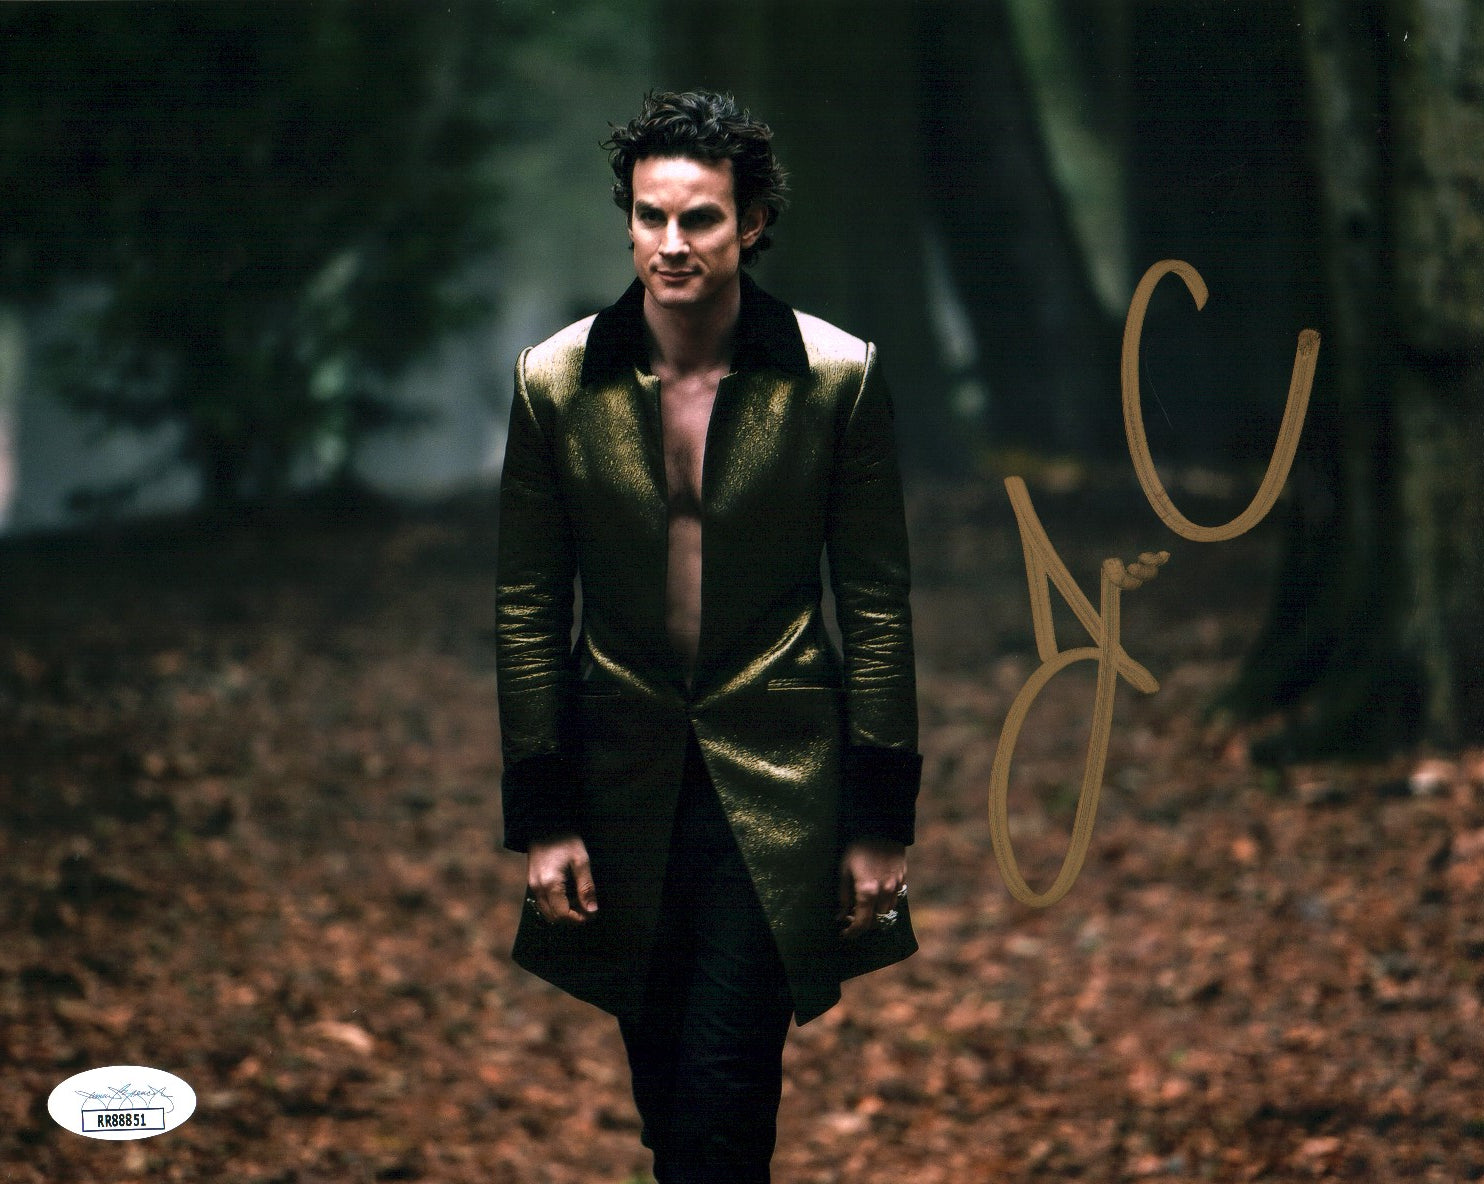 Luke Cook Chilling Adventures of Sabrina 8x10 Signed Photo JSA Certified Autograph